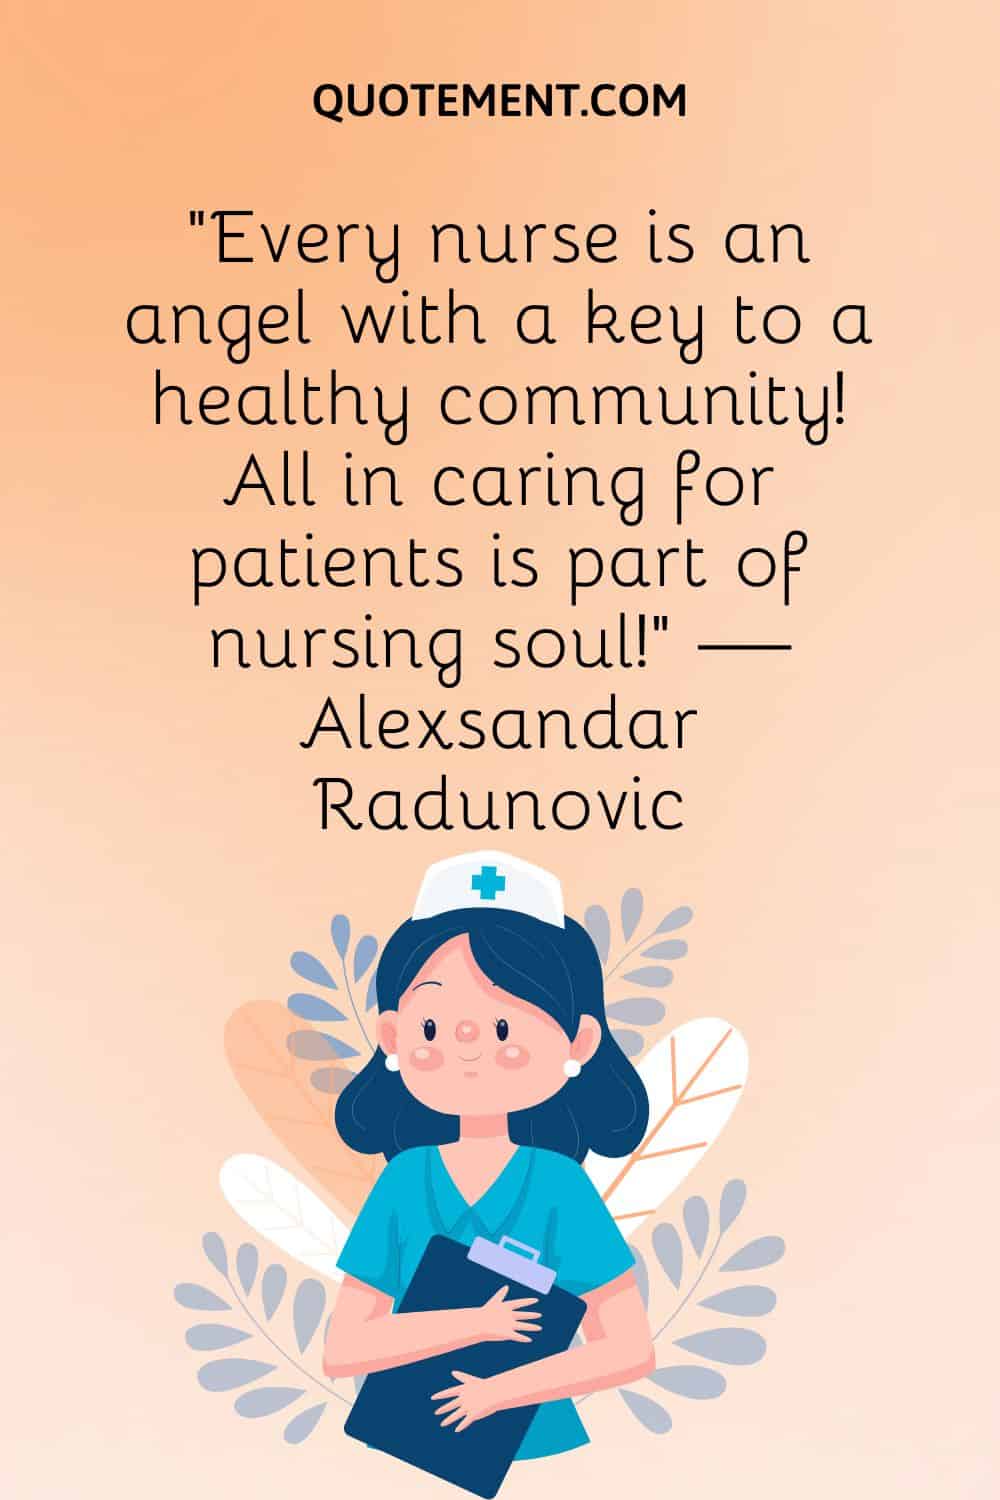 “Every nurse is an angel with a key to a healthy community! All in caring for patients is part of nursing soul!” — Alexsandar Radunovic